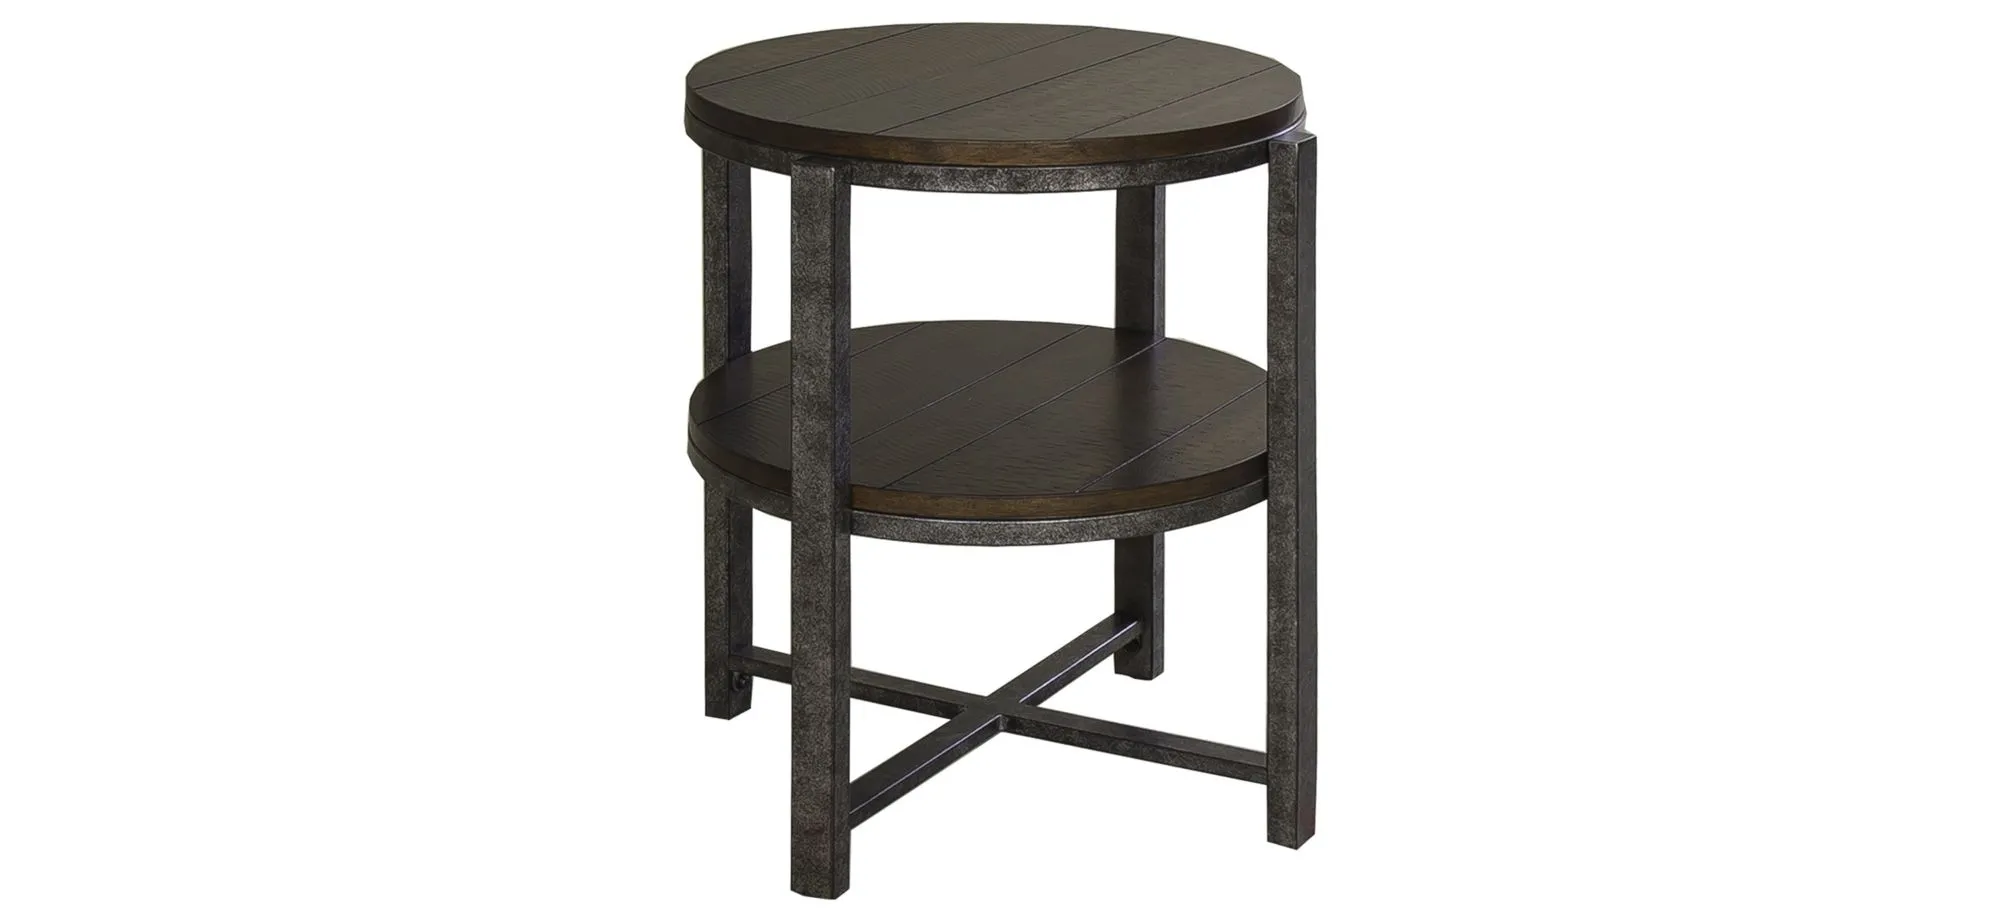 Ellery Round End Table in Mahogany Spice Finish with Pewter Metal by Liberty Furniture